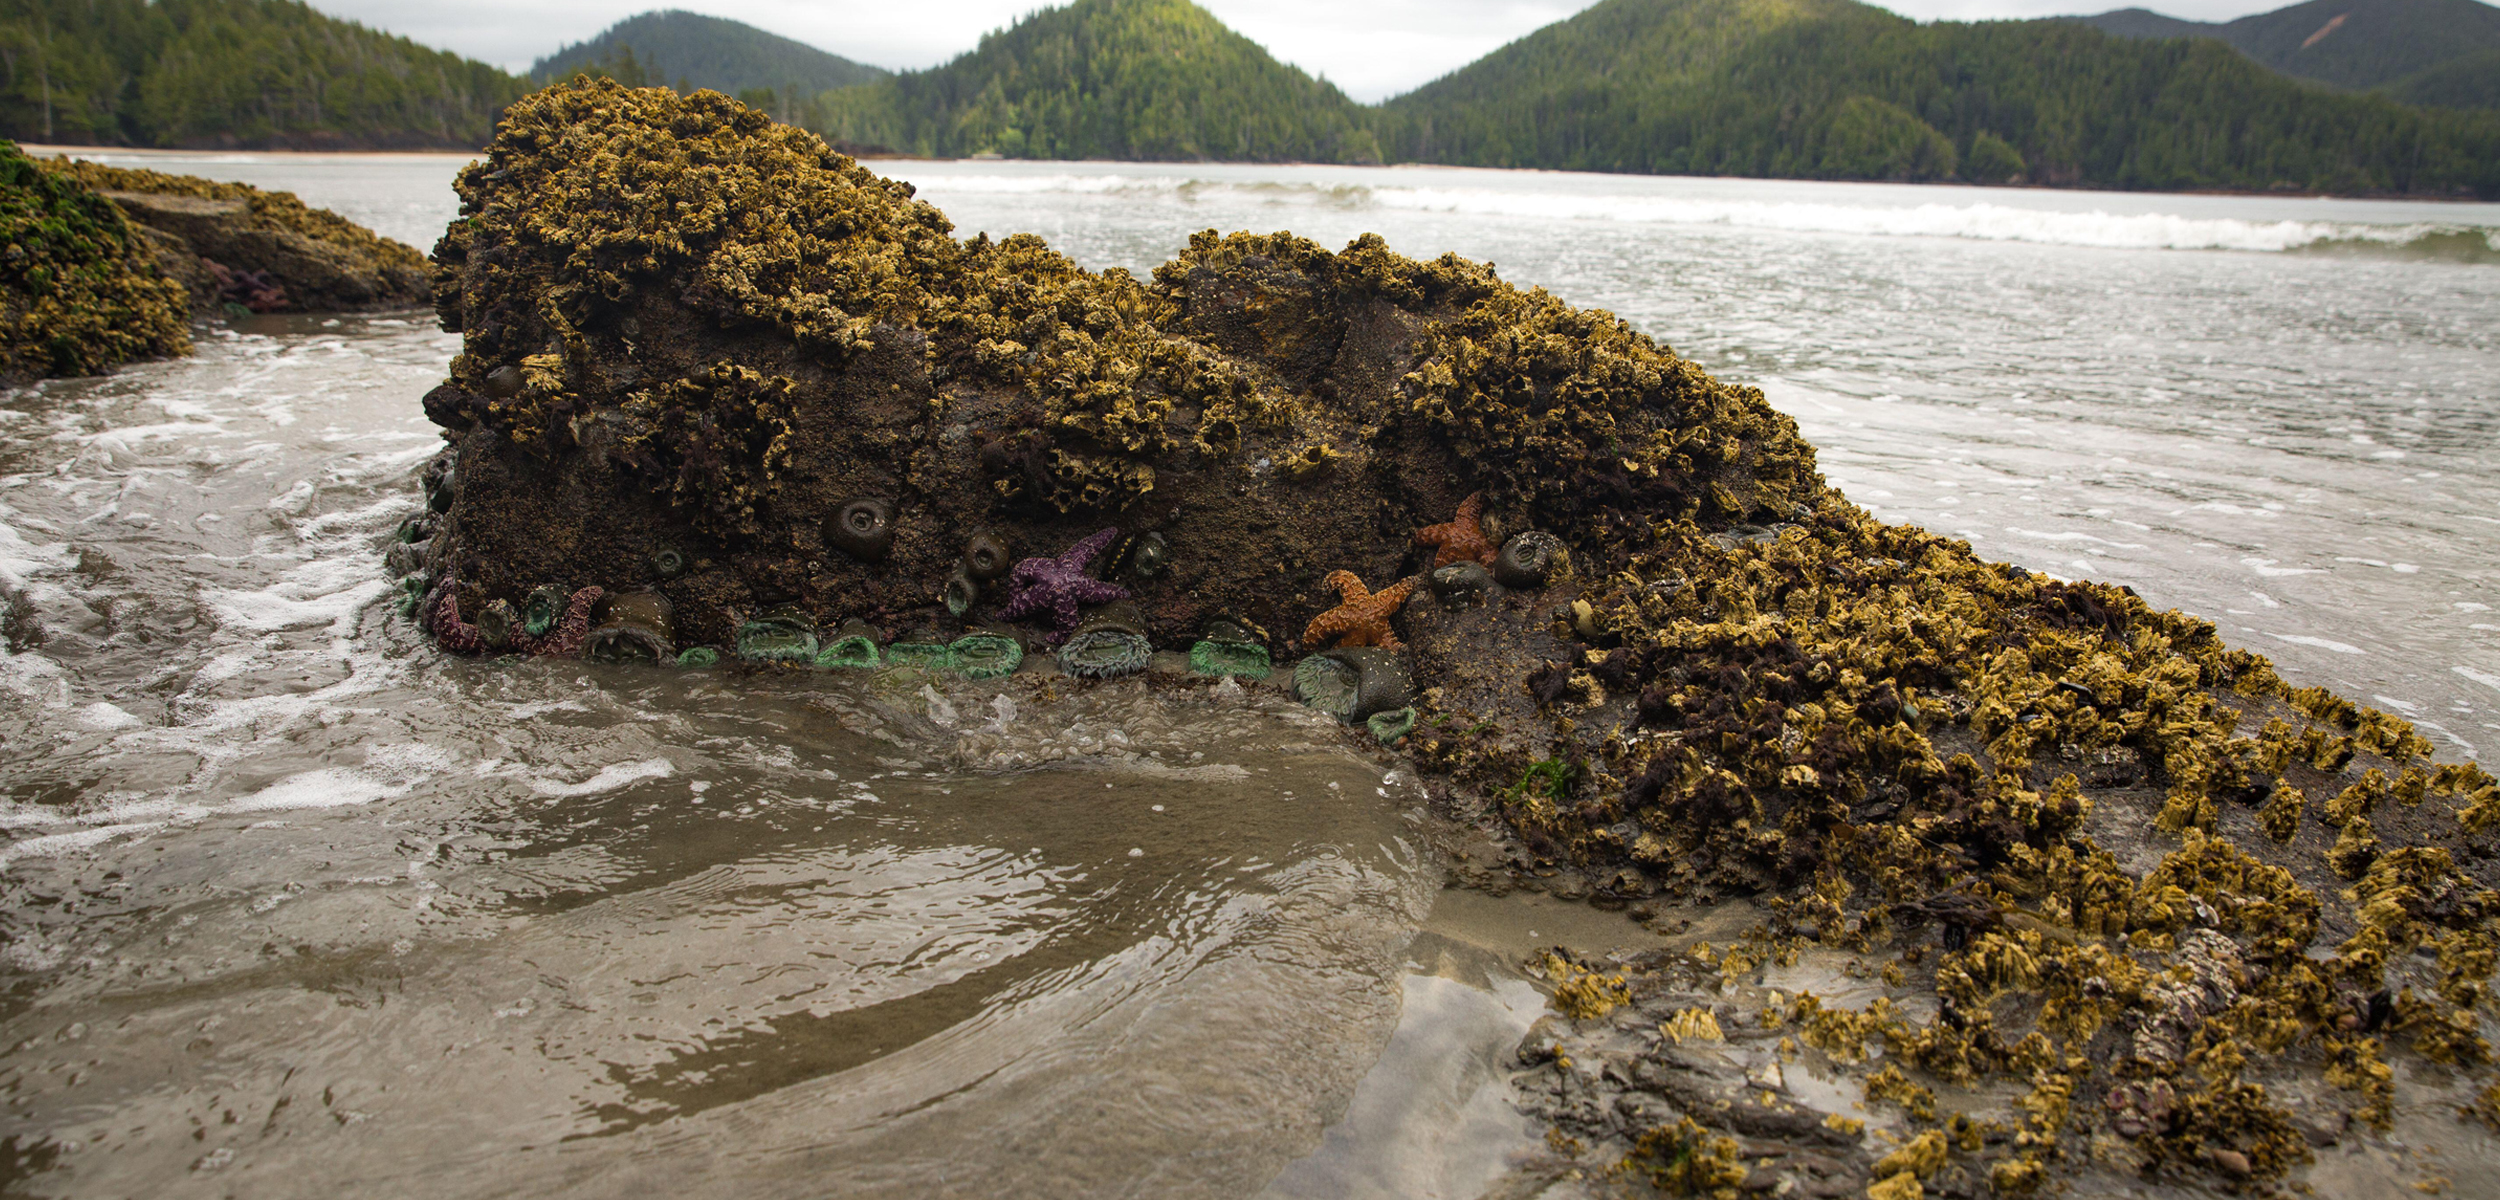 A large rock covered in seaweed ad marine invertebrates sits in the sand in front of a bay.